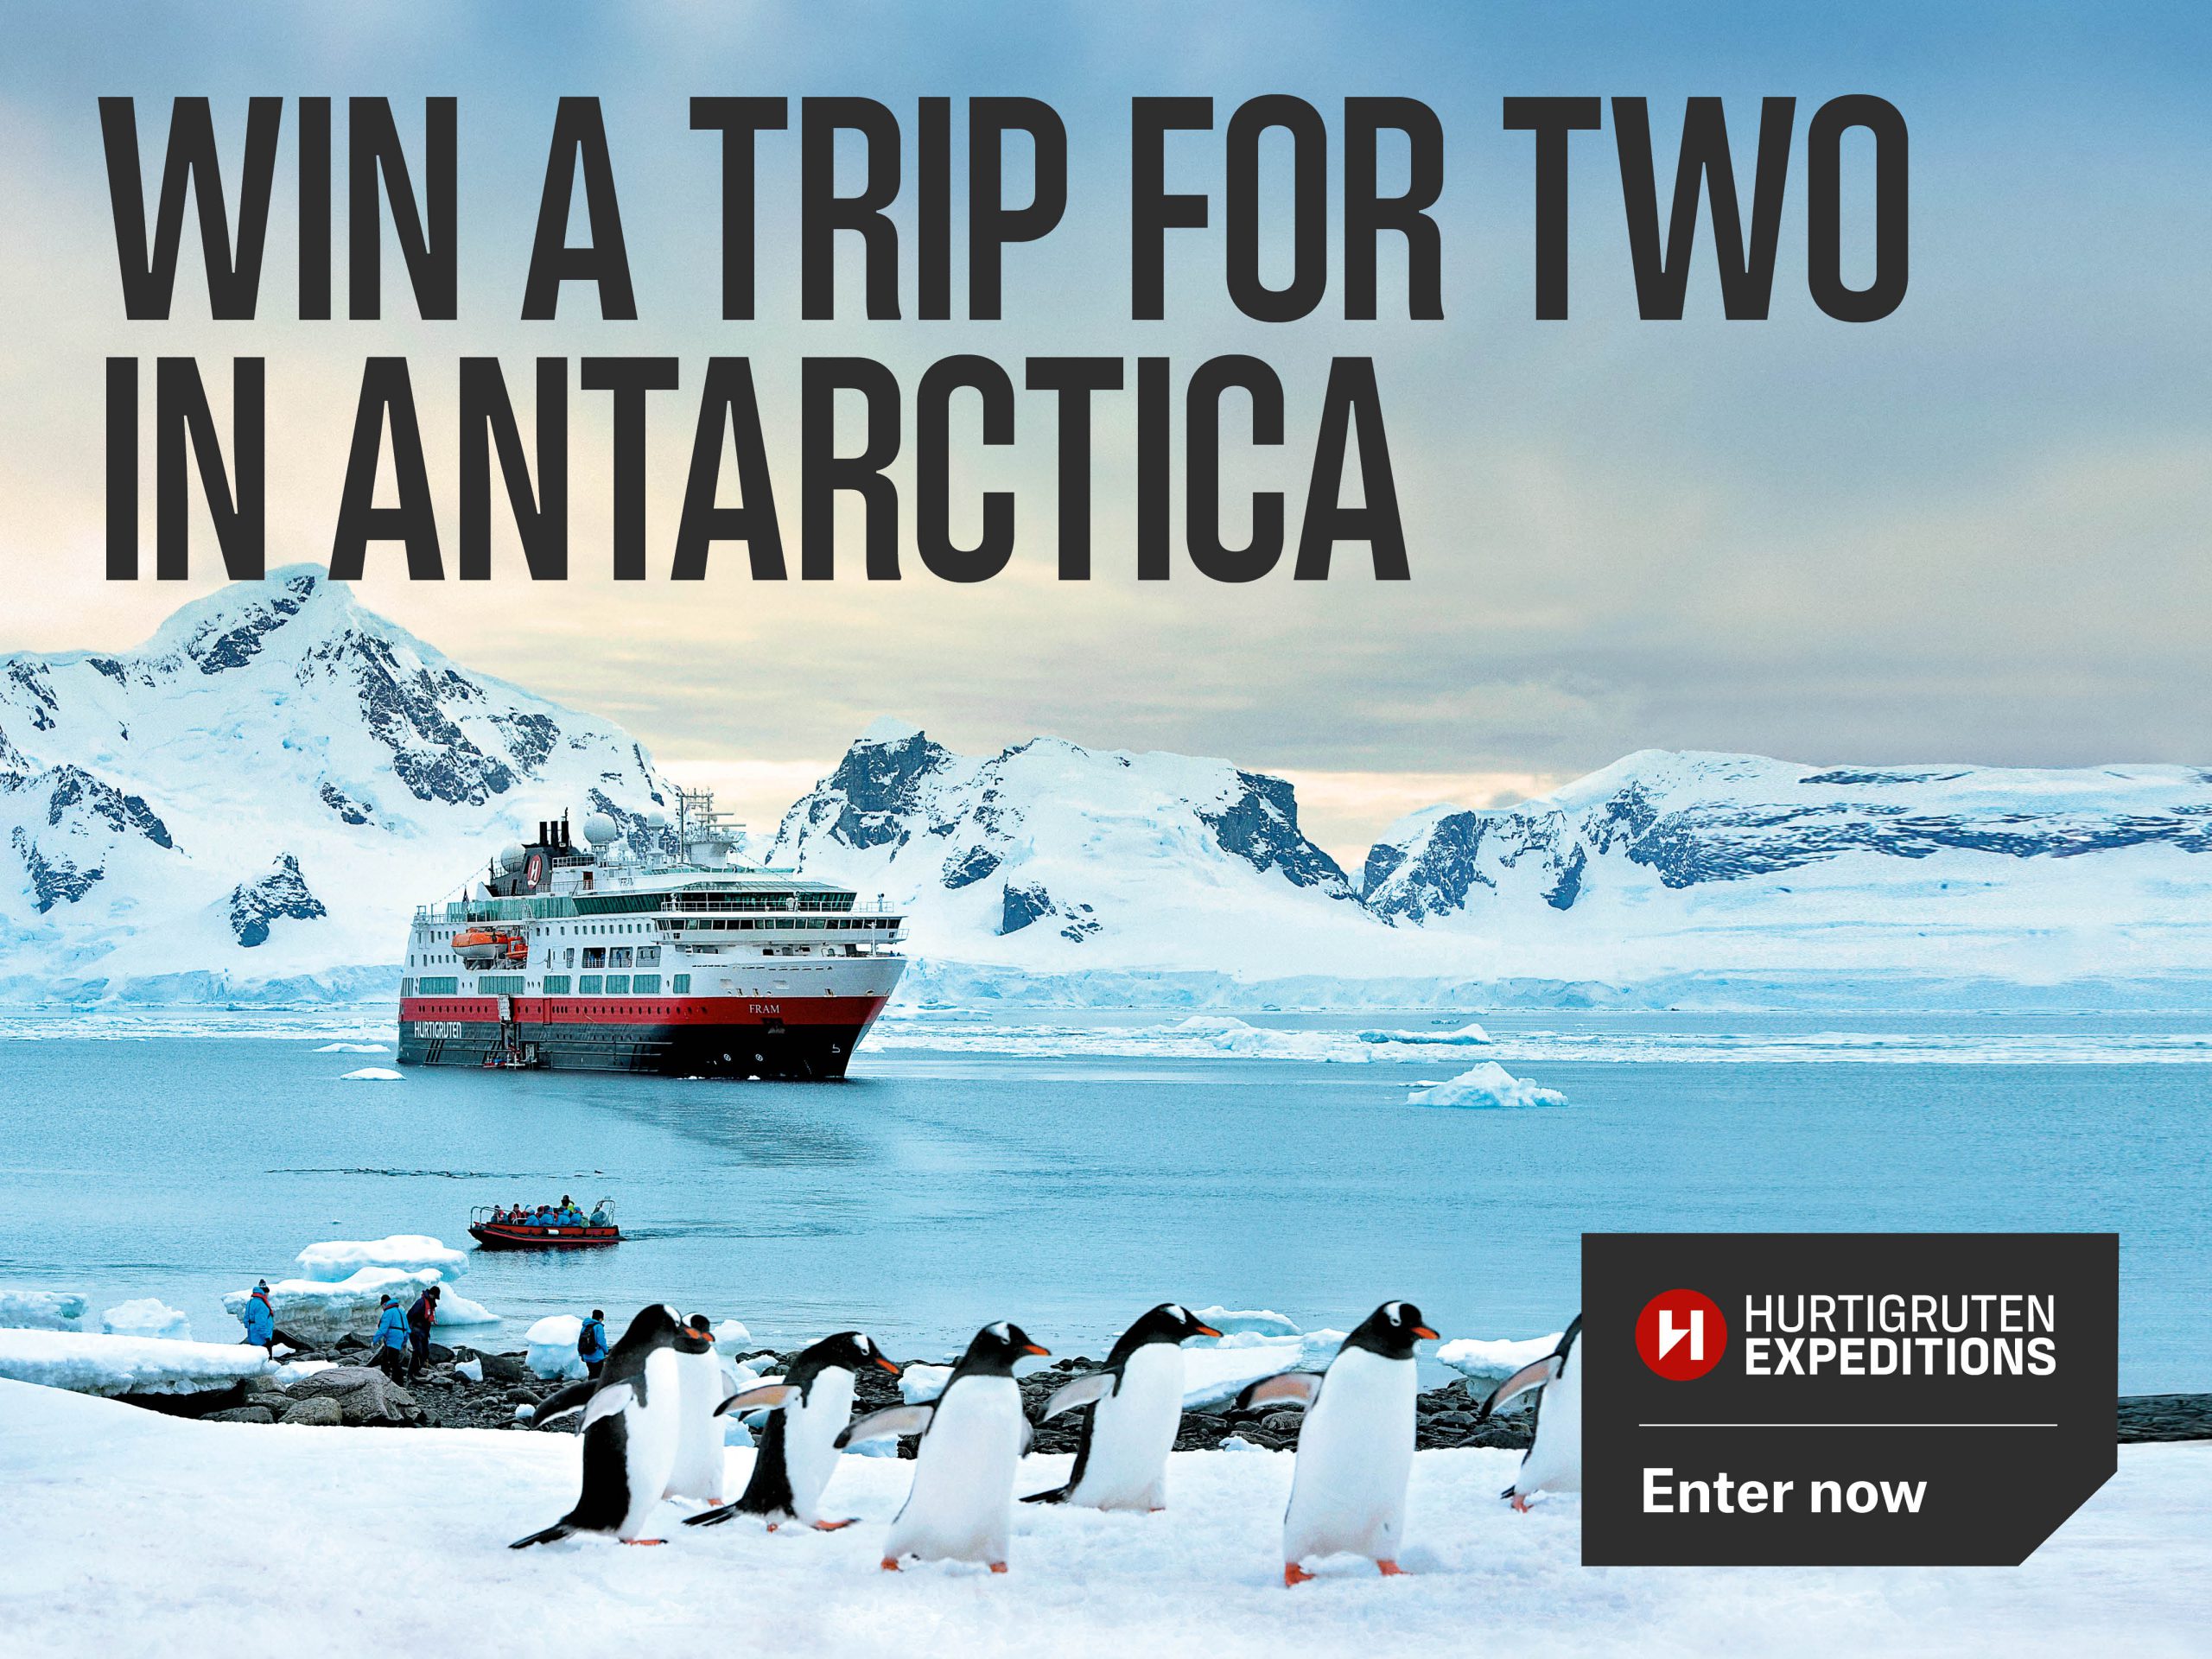 Win an Antarctica adventure for two worth over $20,000 with Hurtigruten Expeditions